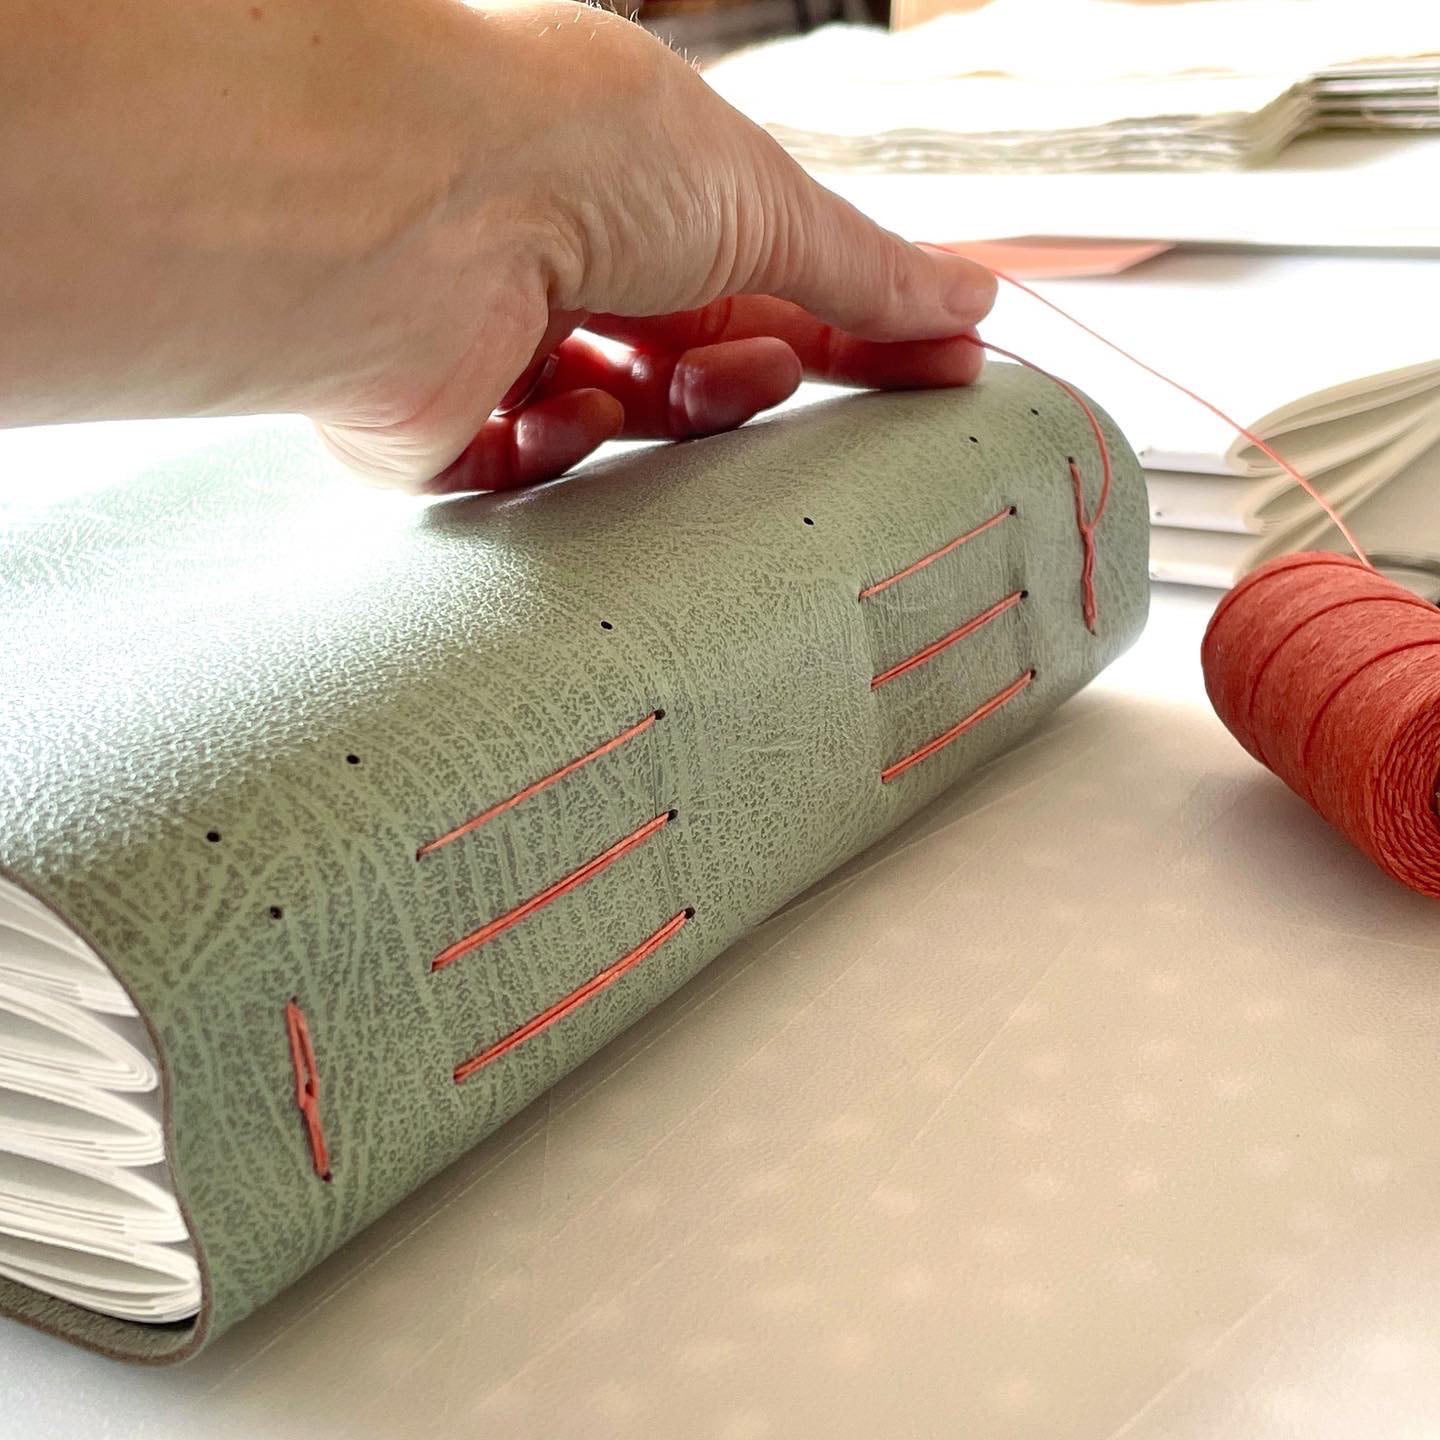 Pages are sewn through the leather to make an archival, long lasting book you can treasure for generations.